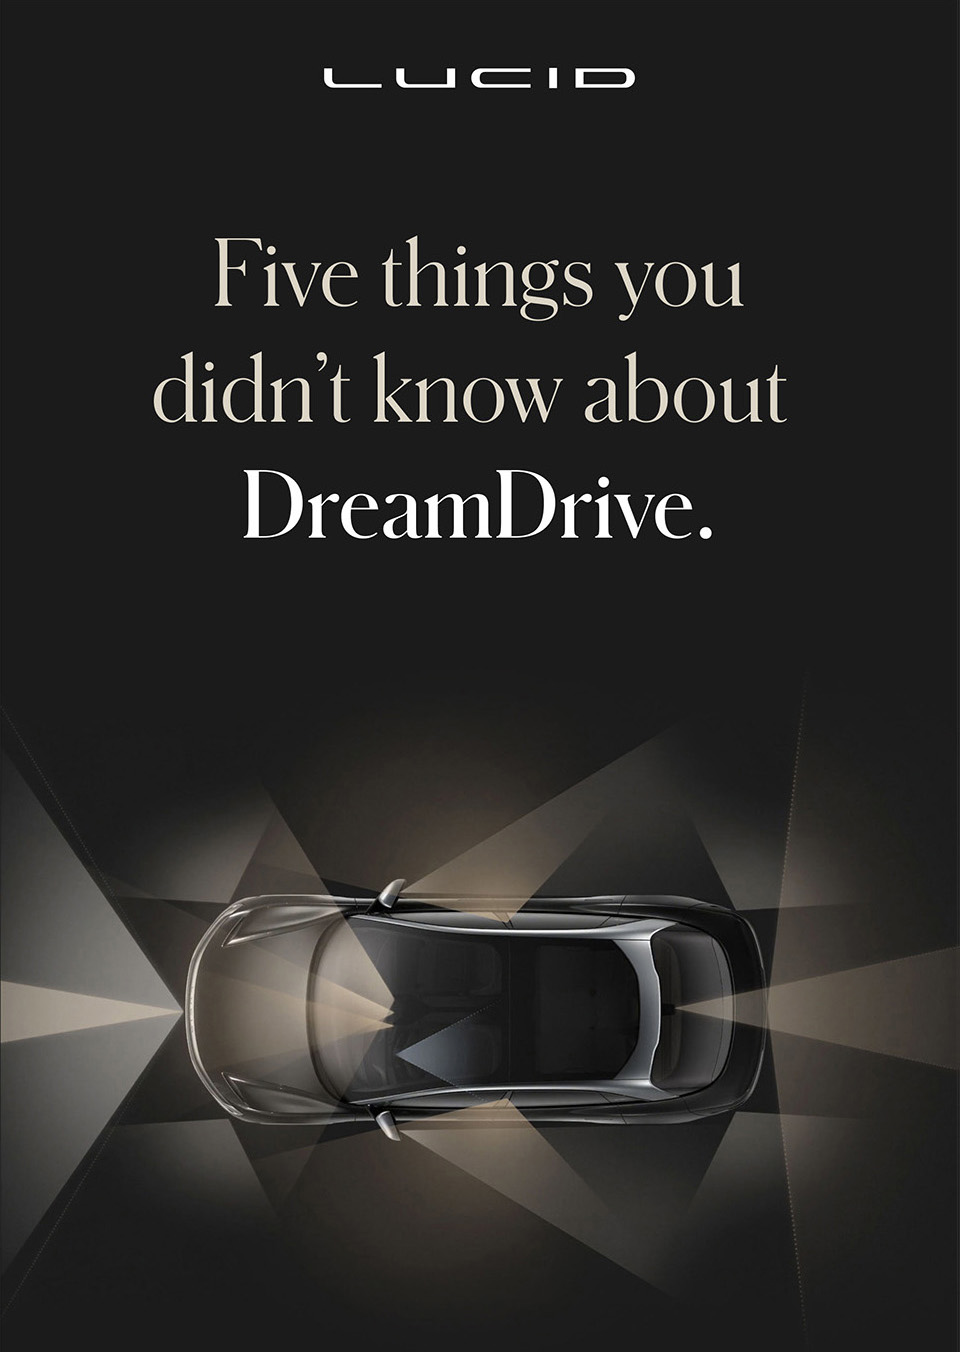 Five things you didn't know about DreamDrive.